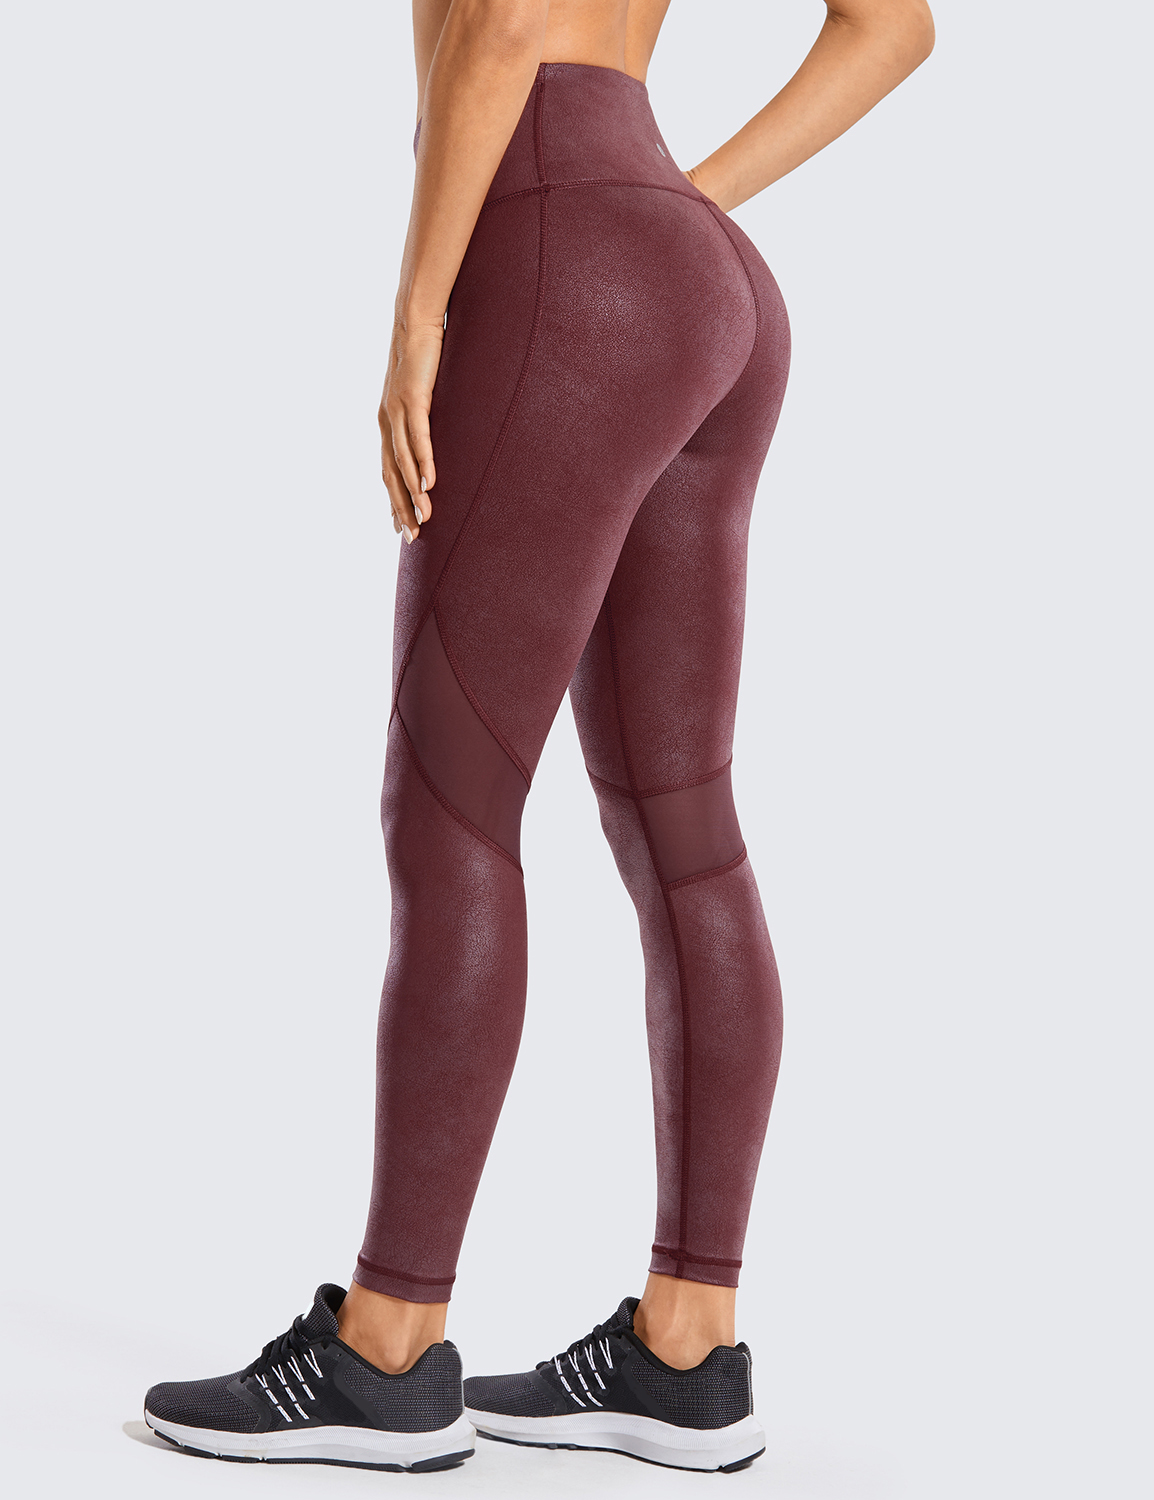 leather yoga leggings for Sale,Up To OFF 69%